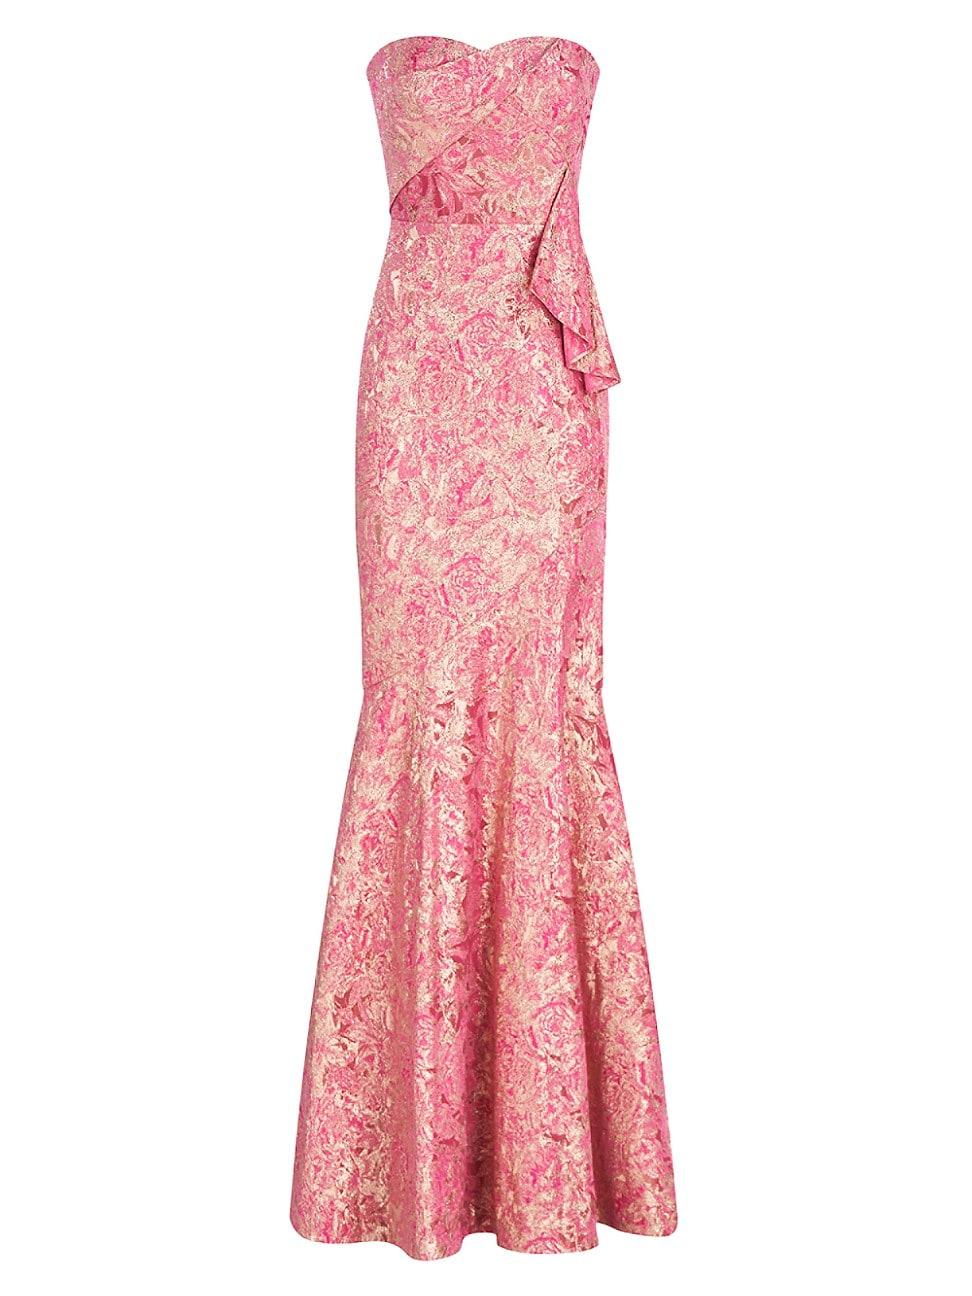 THEIA Ambrose Floral Jacquard Strapless Gown in Pink | Lyst